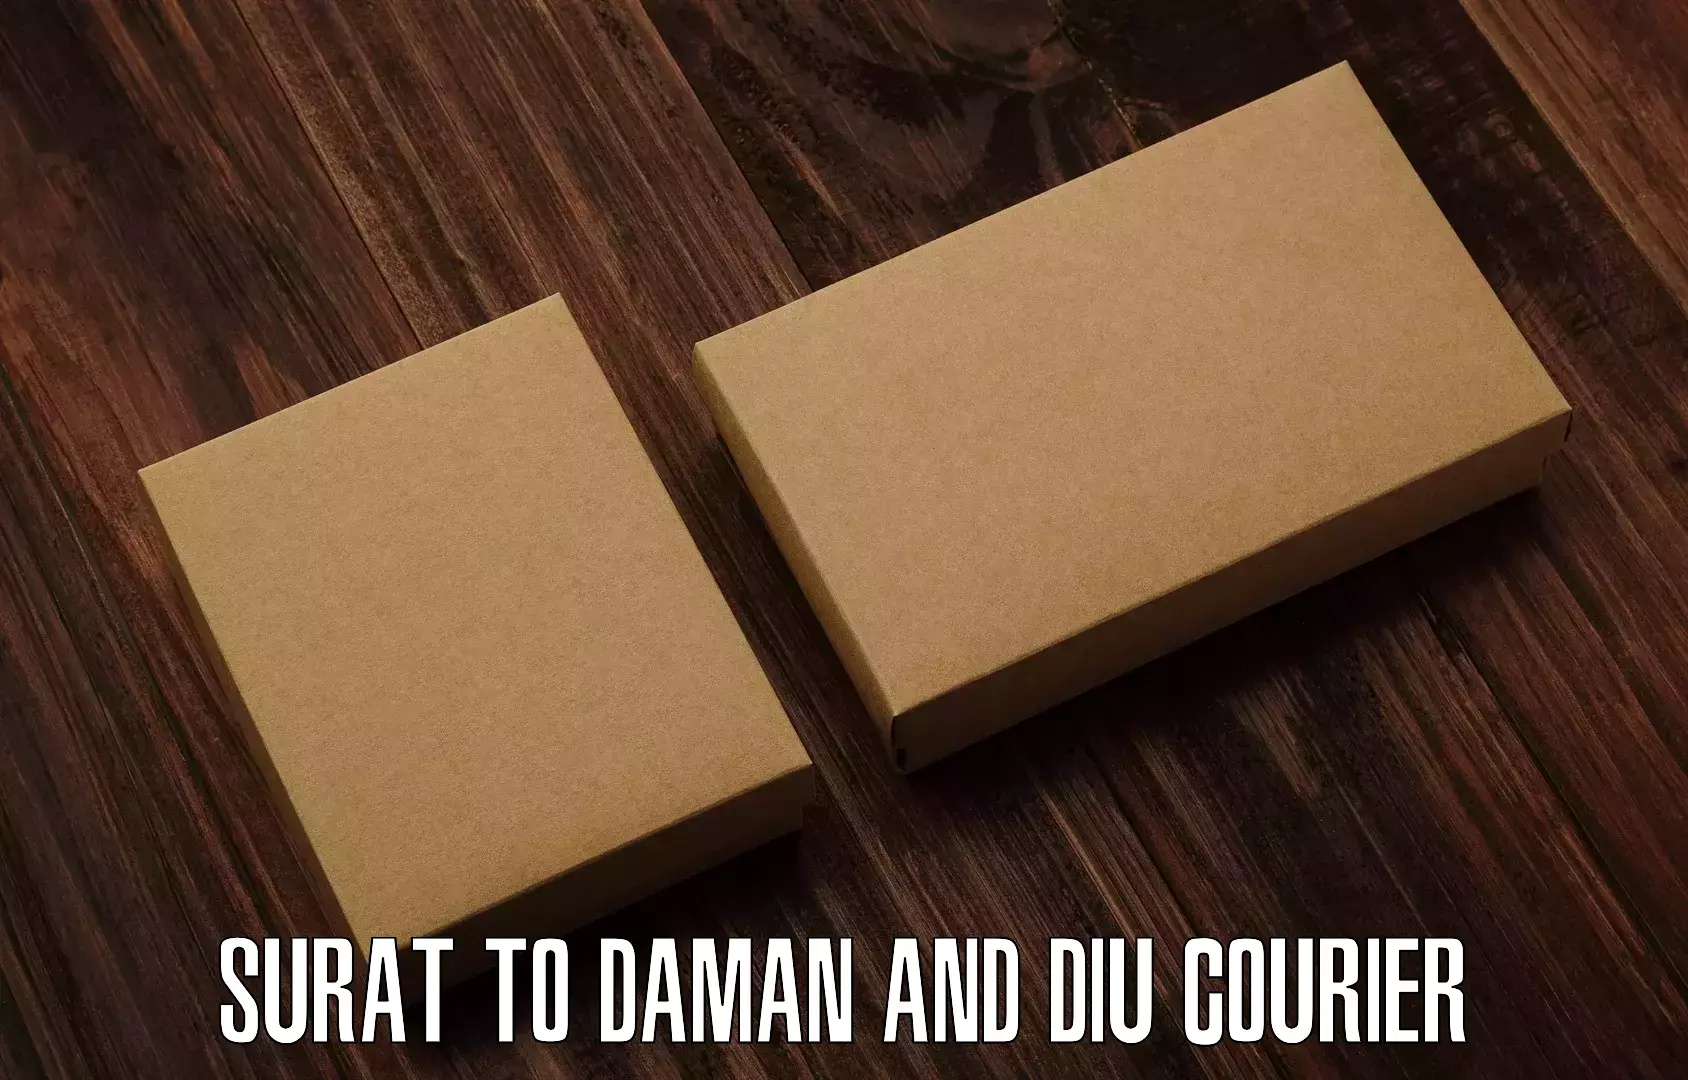 High-priority parcel service Surat to Daman and Diu